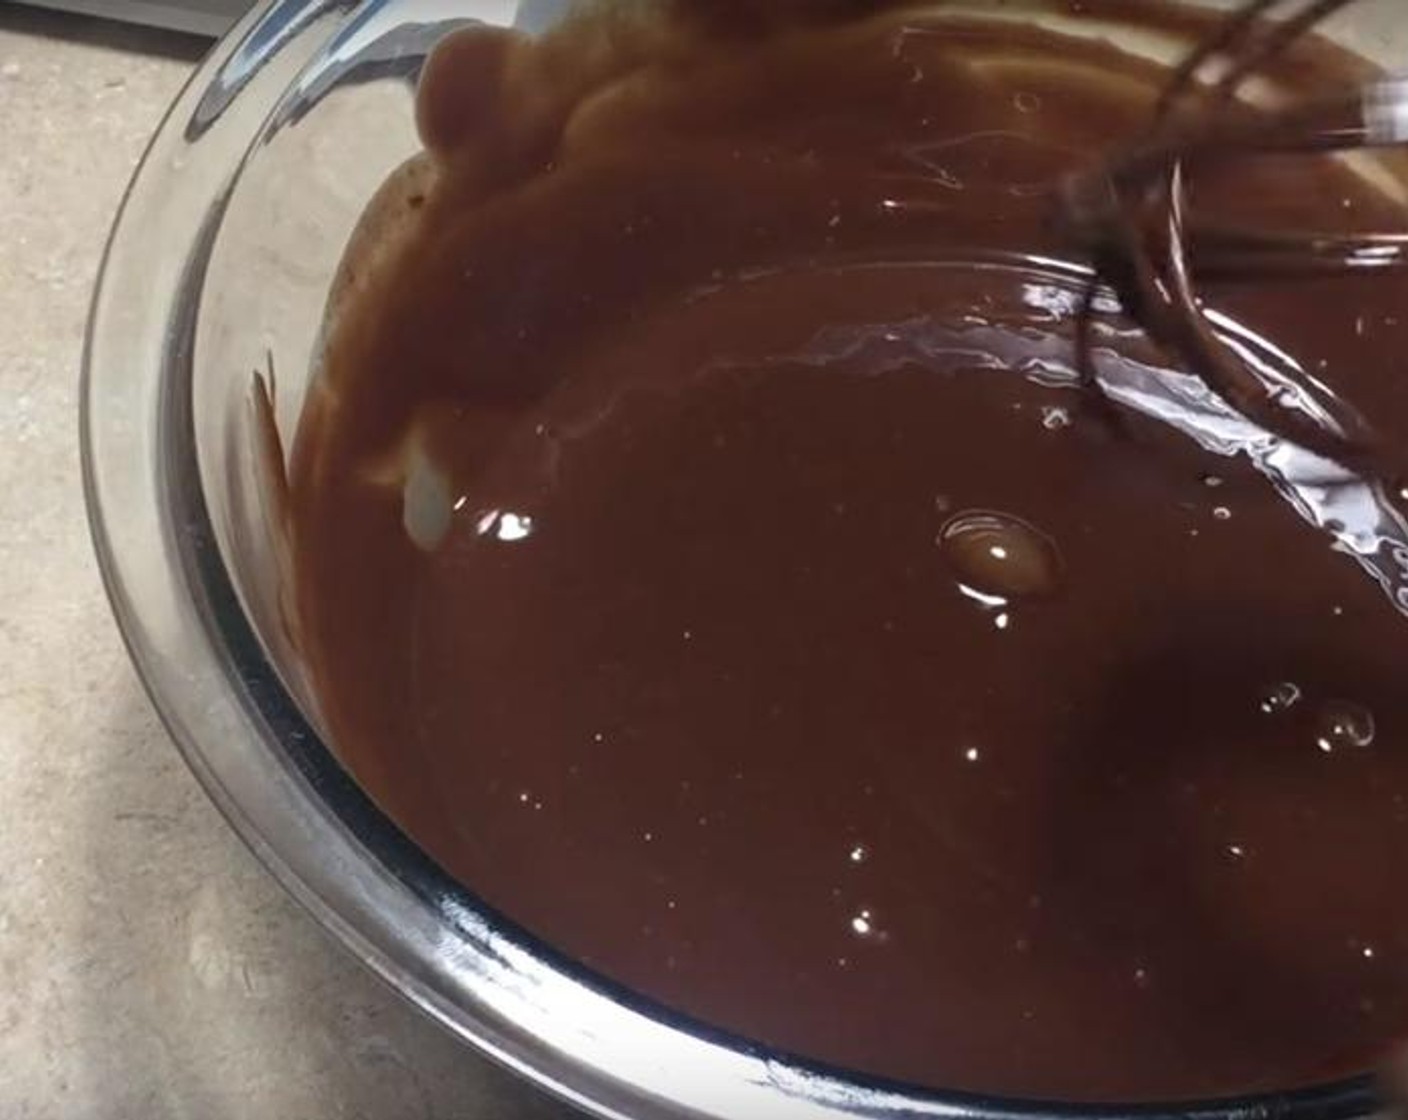 step 2 For the chocolate ganache: in a bowl, put Chocolate Chips (2/3 cup). Add Heavy Cream (1/2 cup). Whisk them together. Heat the mix on the stove on medium heat until it begins to bowl.